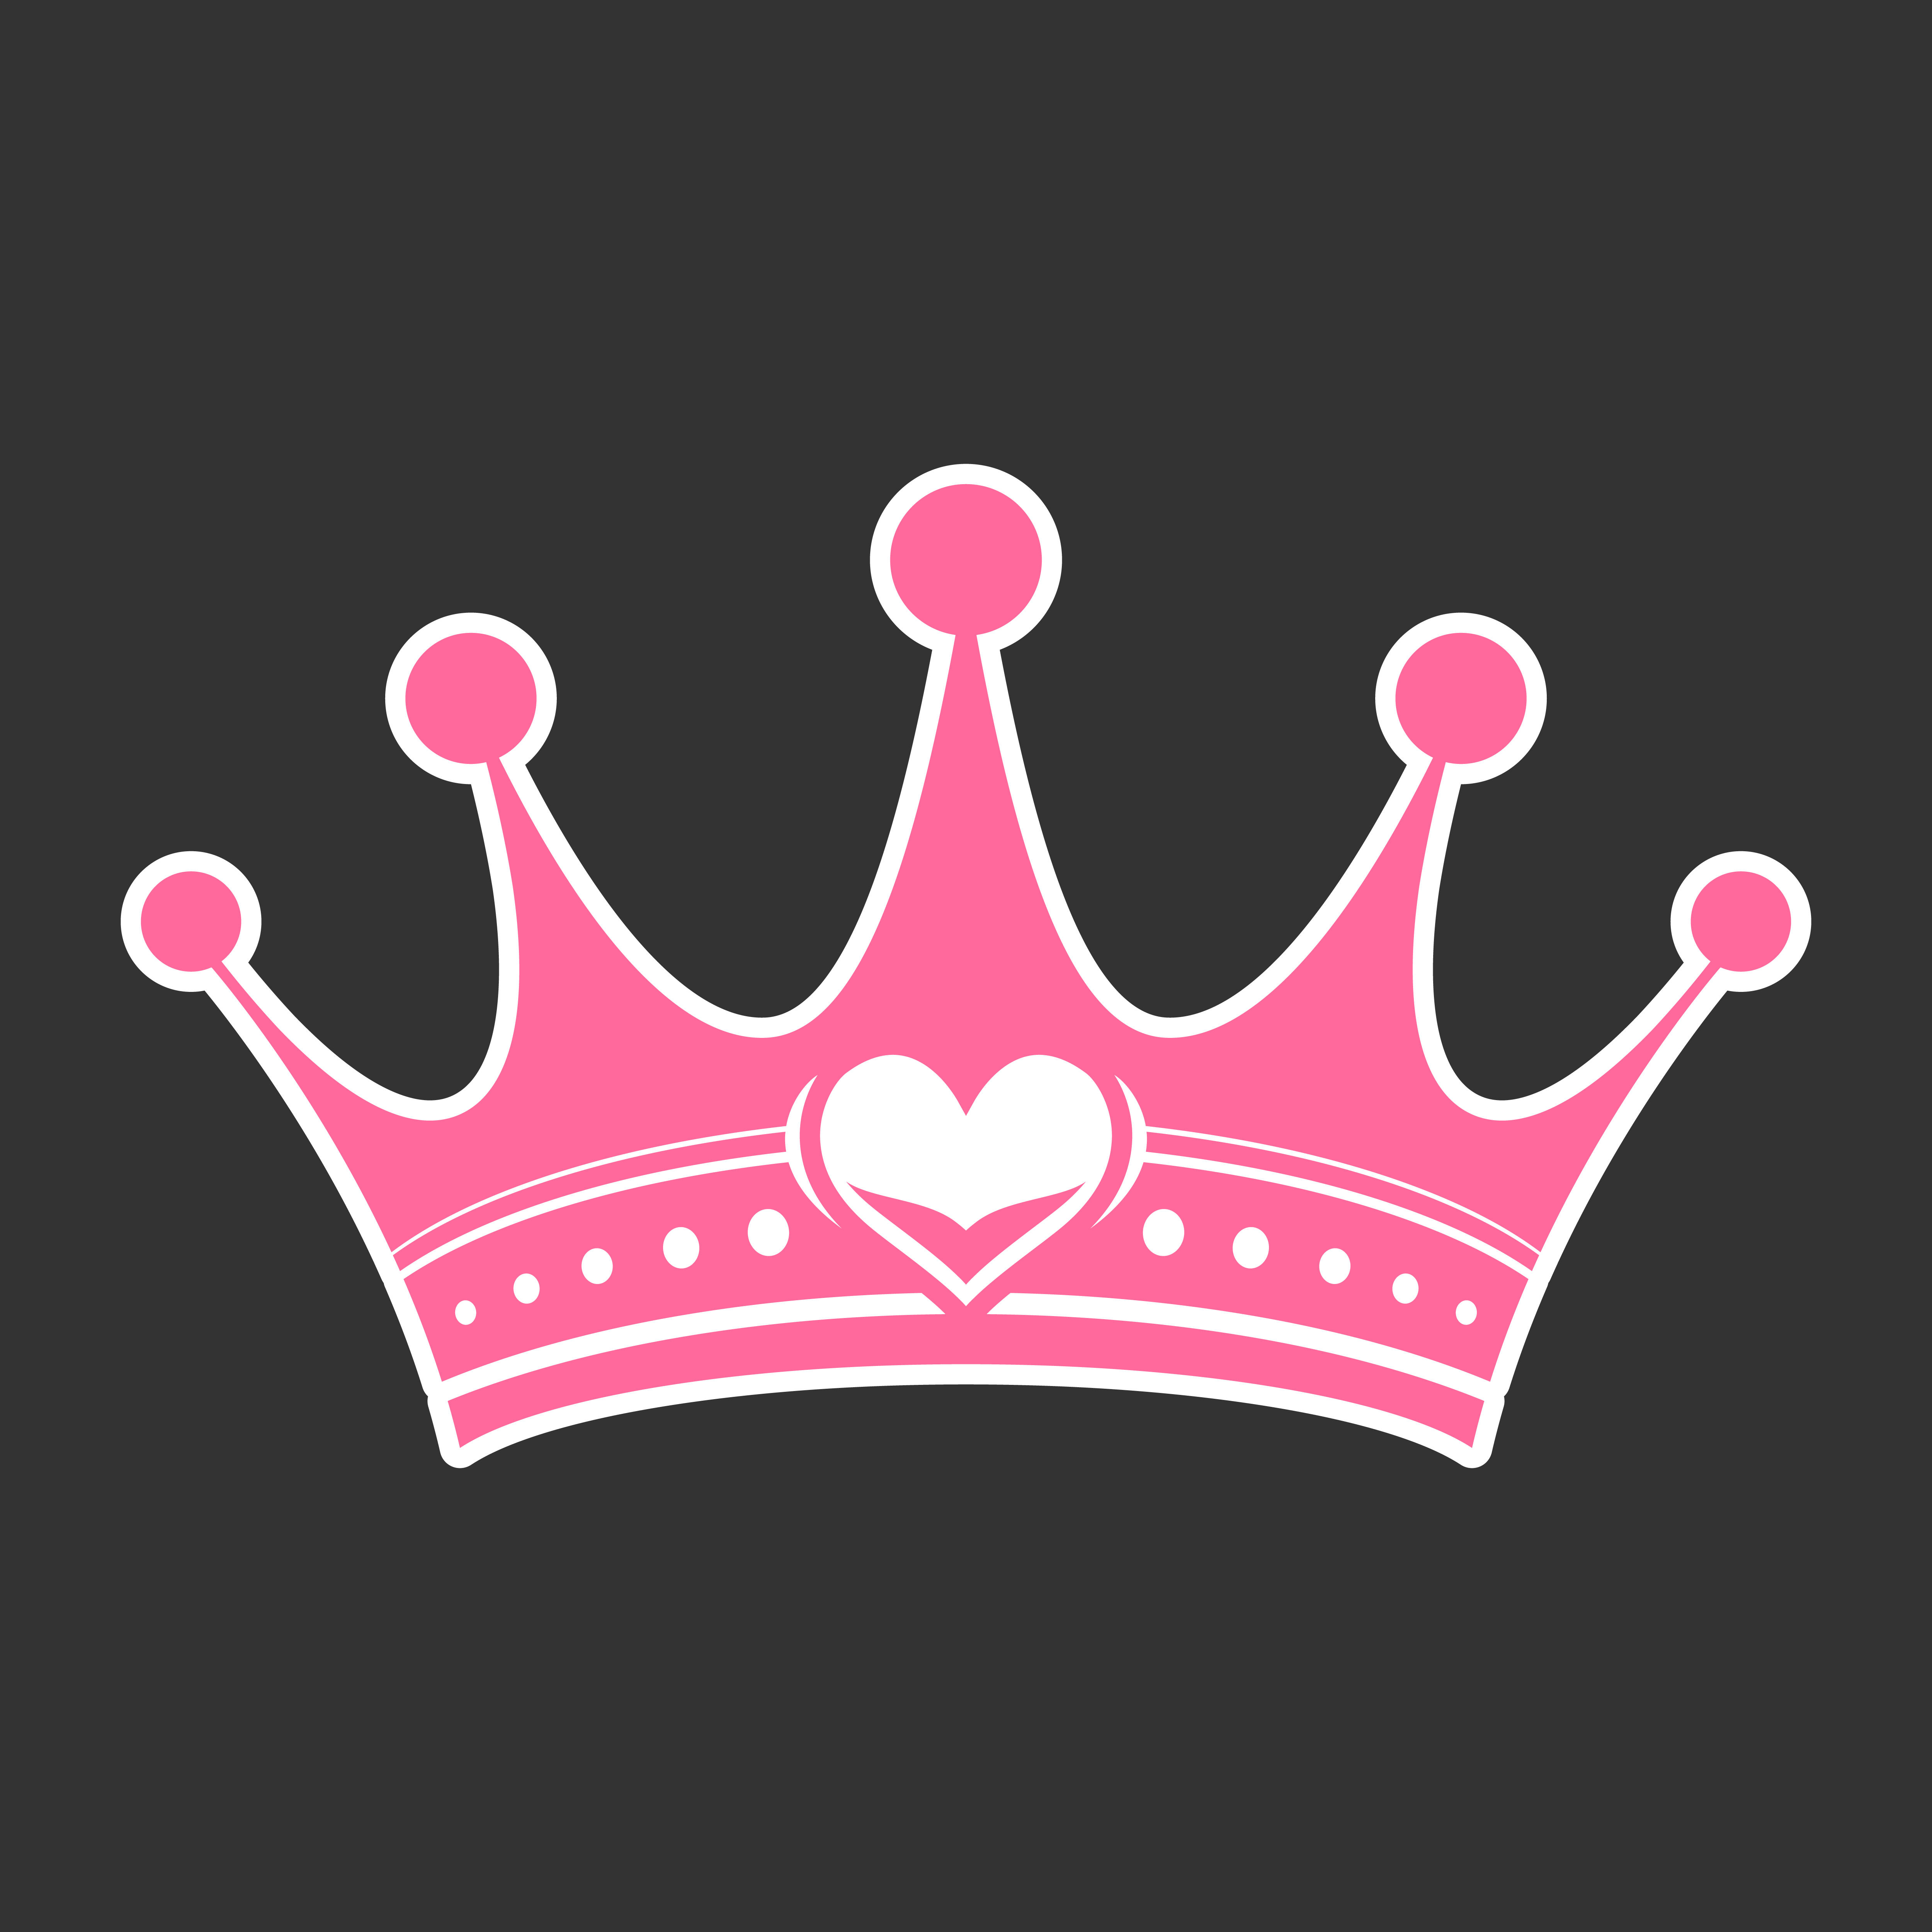 Download Pink Girly Princess Royalty Crown With Heart Jewels 554648 ...